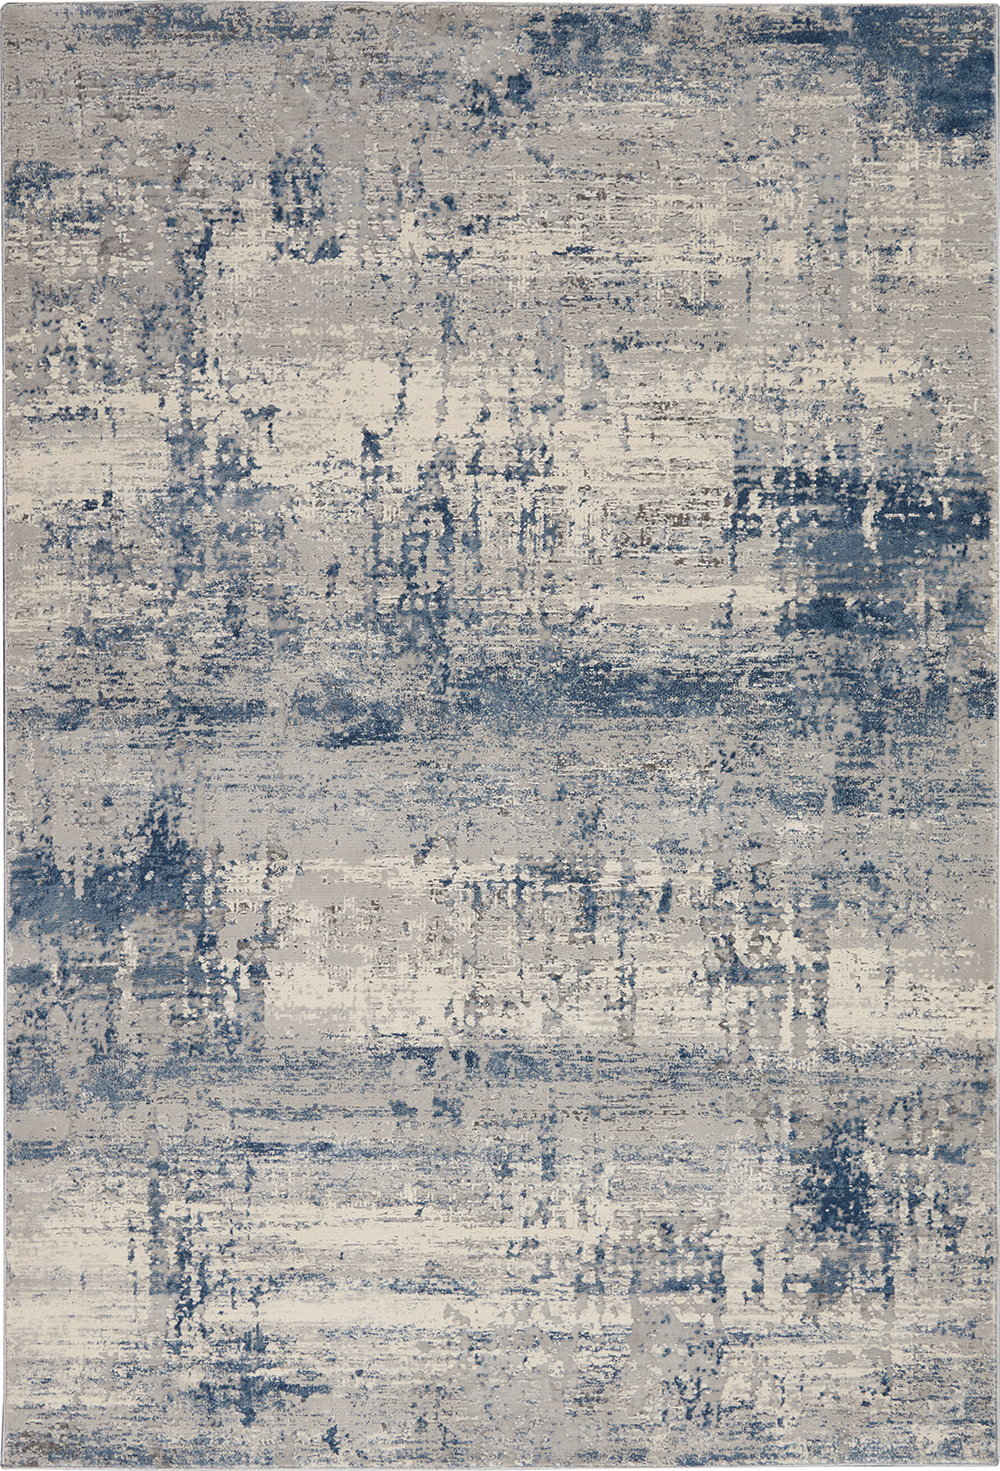 Nourison Rugs - Rustic Textures Rectanglular RUS10 Rug in Ivory / Blue - 1.8m x 1.2m